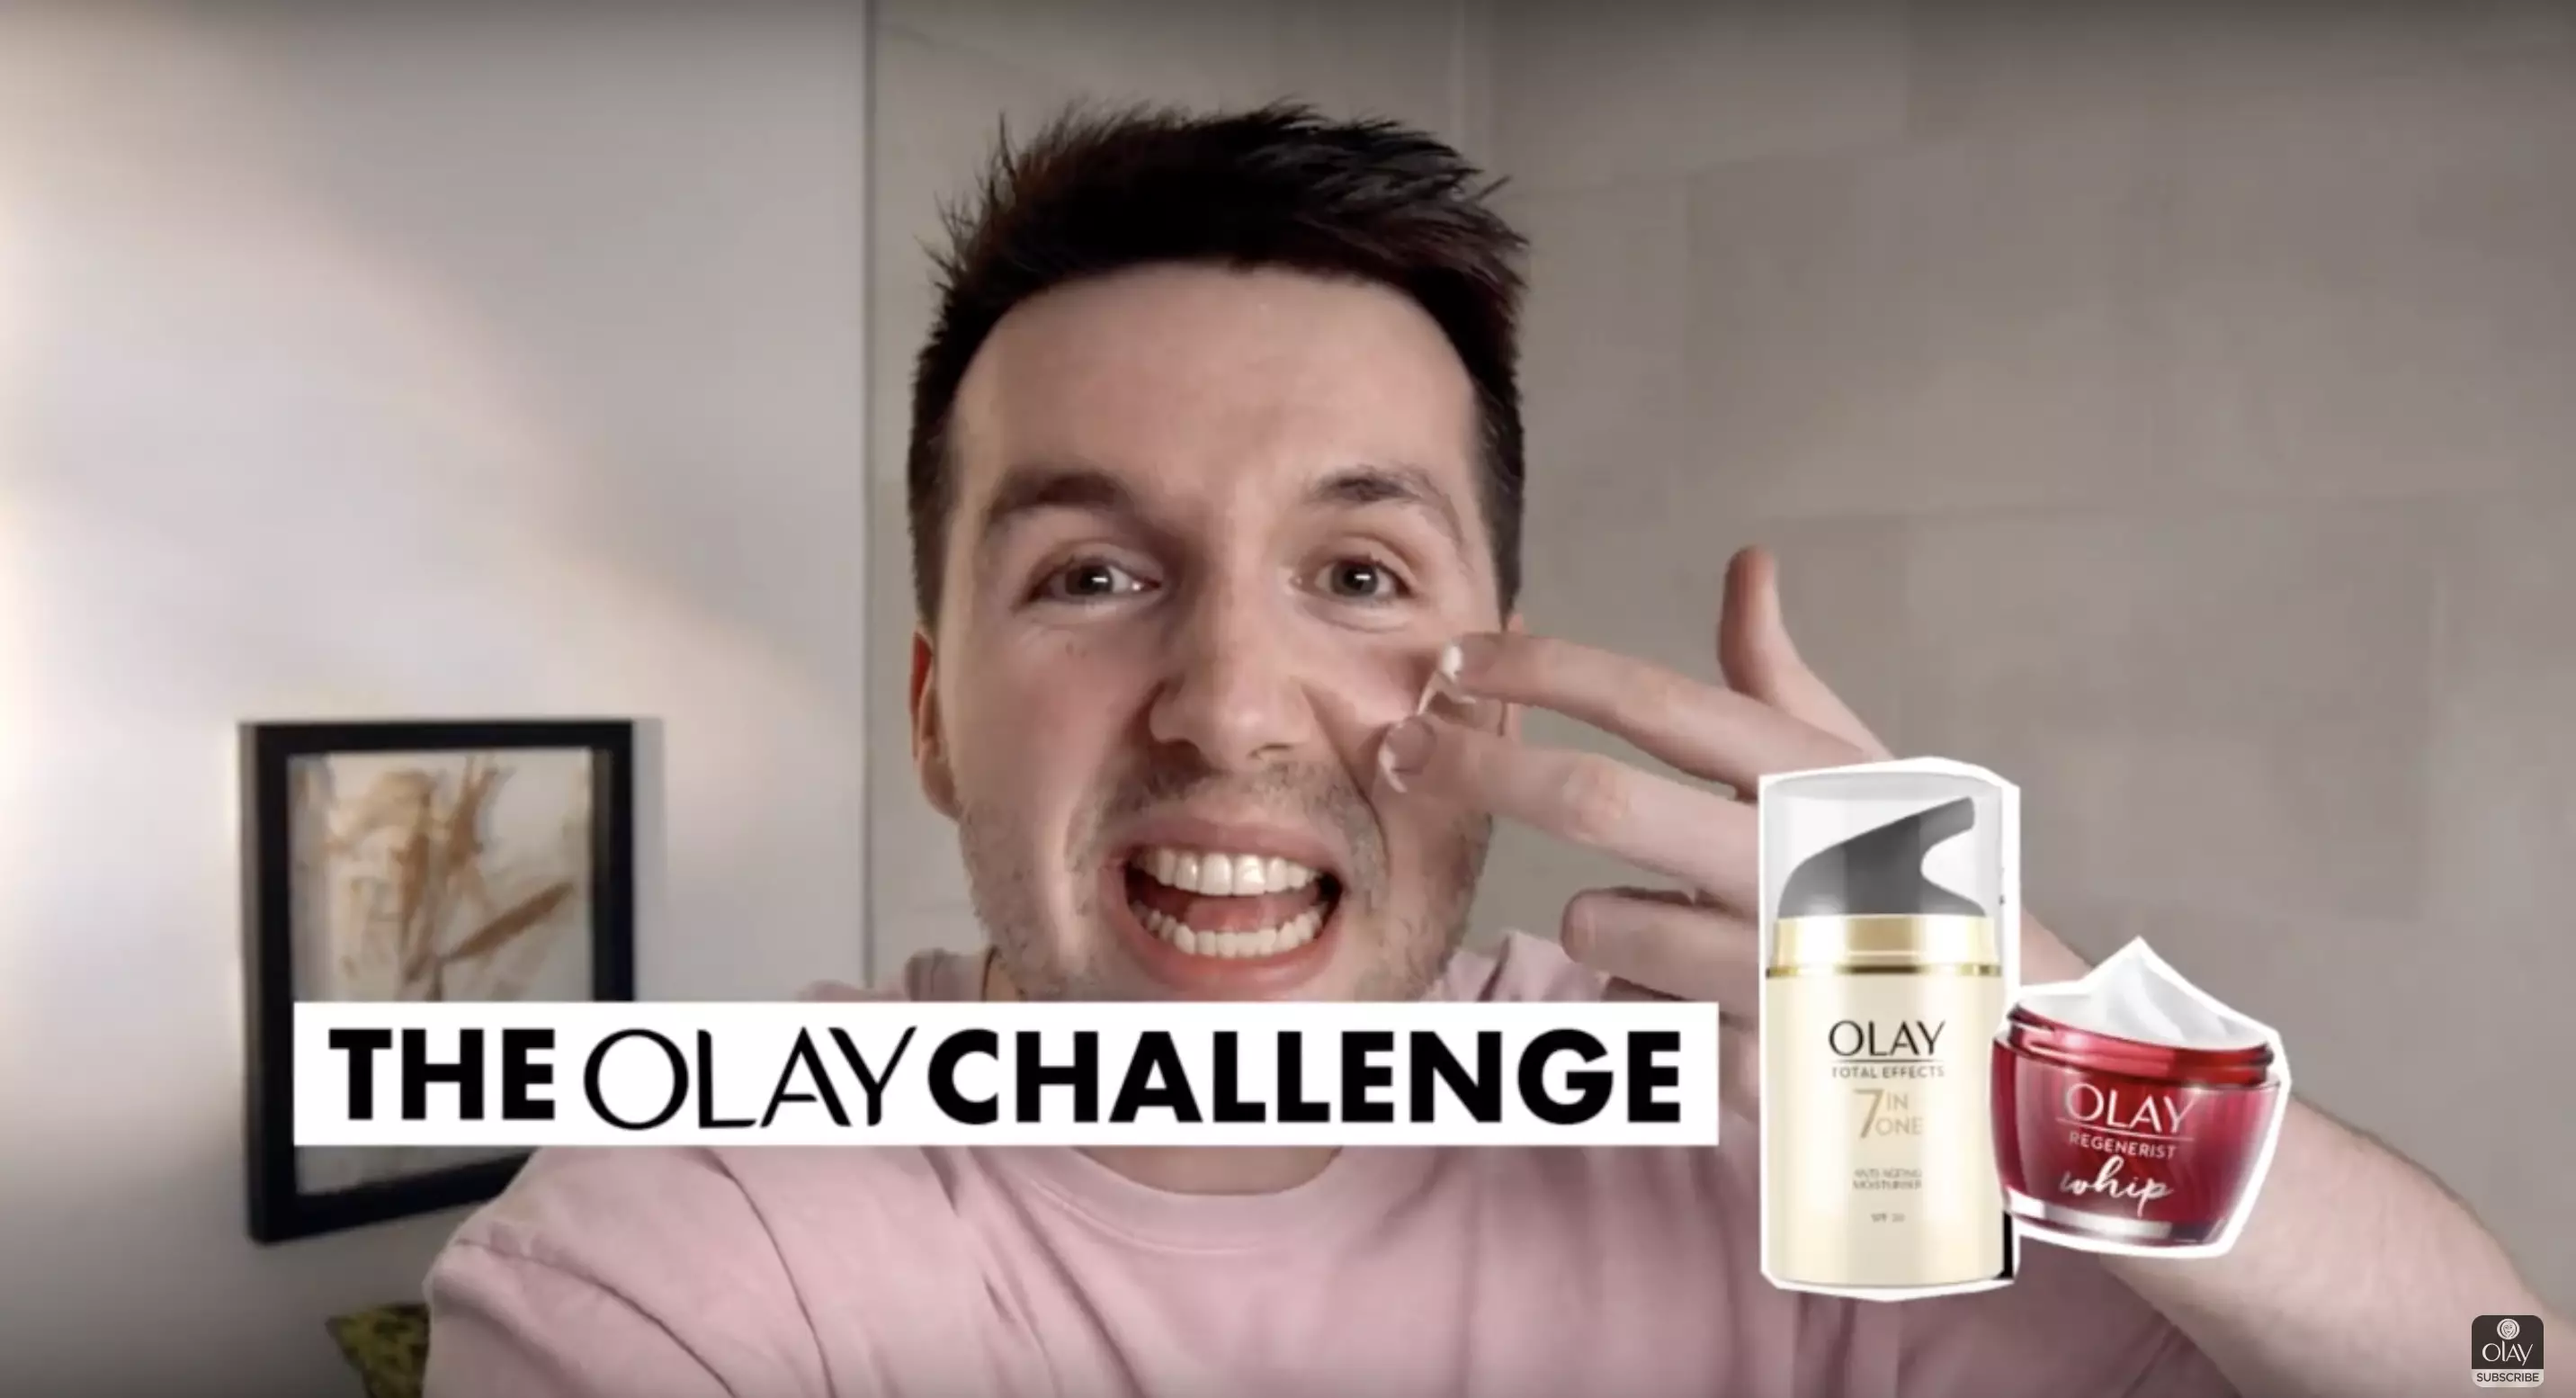 A man stars in Olay's latest advert for the first time in the brand's history.